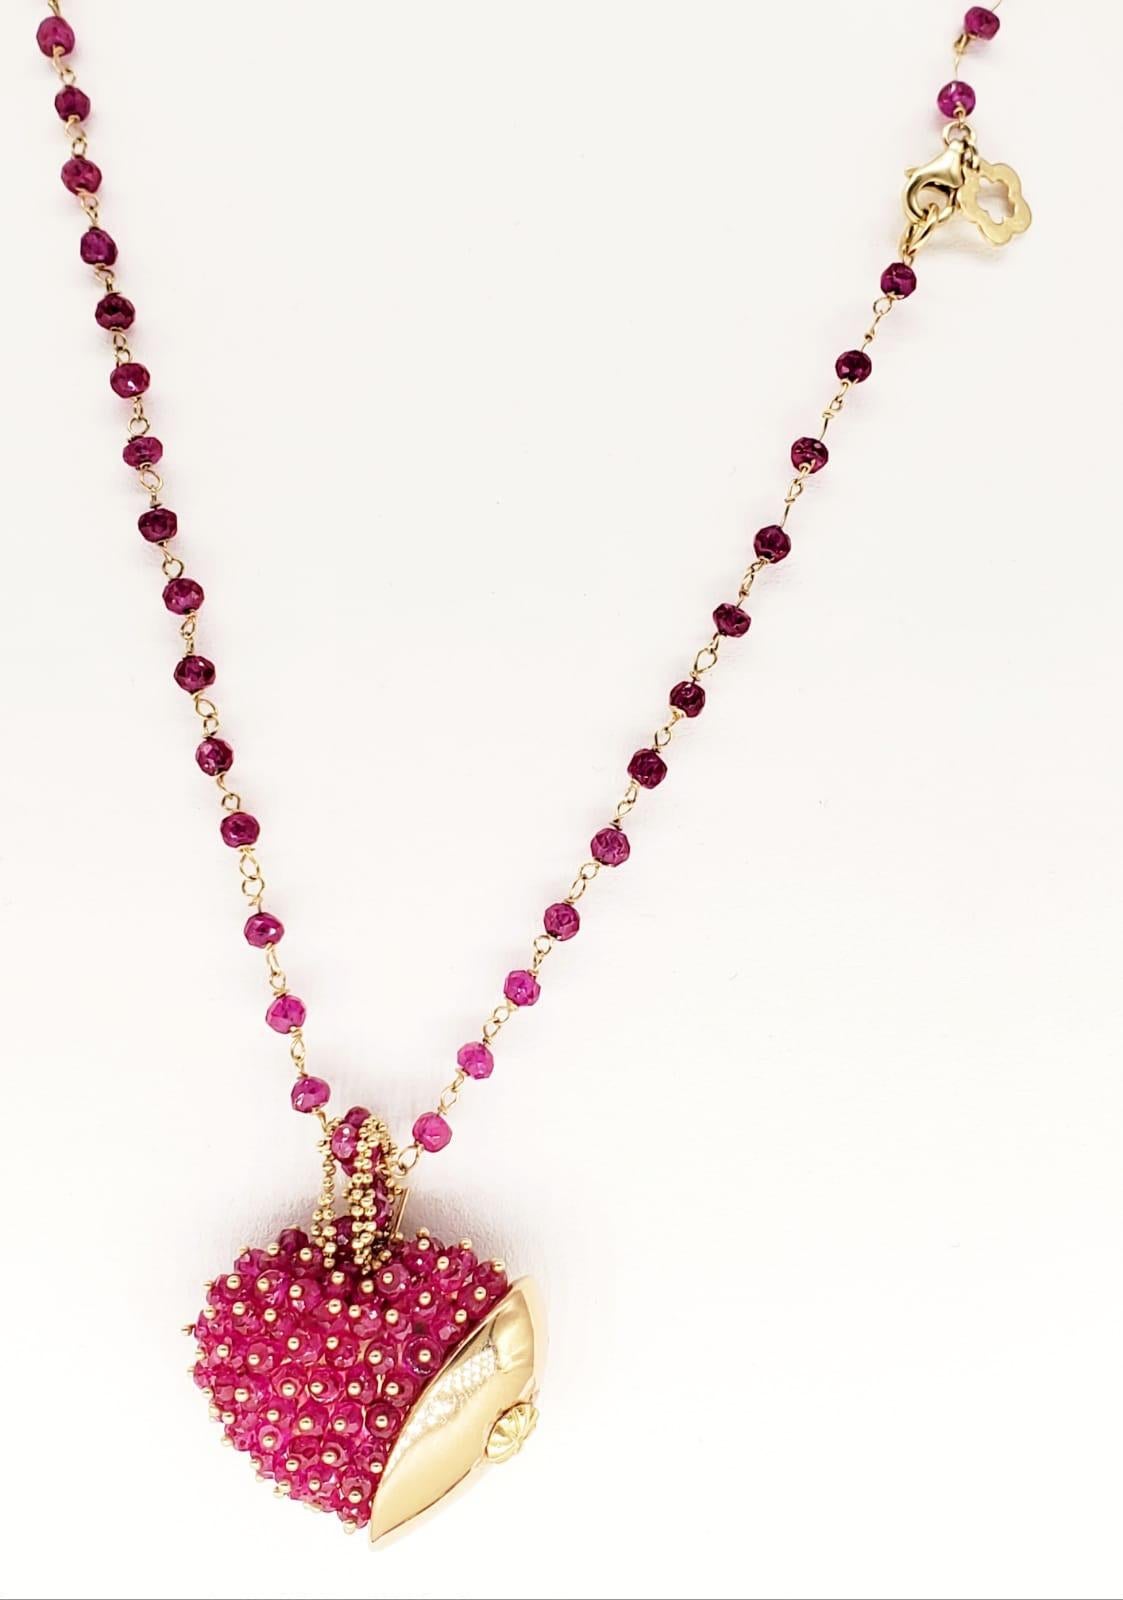 Women's Vintage Strawberry Heart 50 Carat Faceted Ruby Beads Necklace 14 Karat Gold